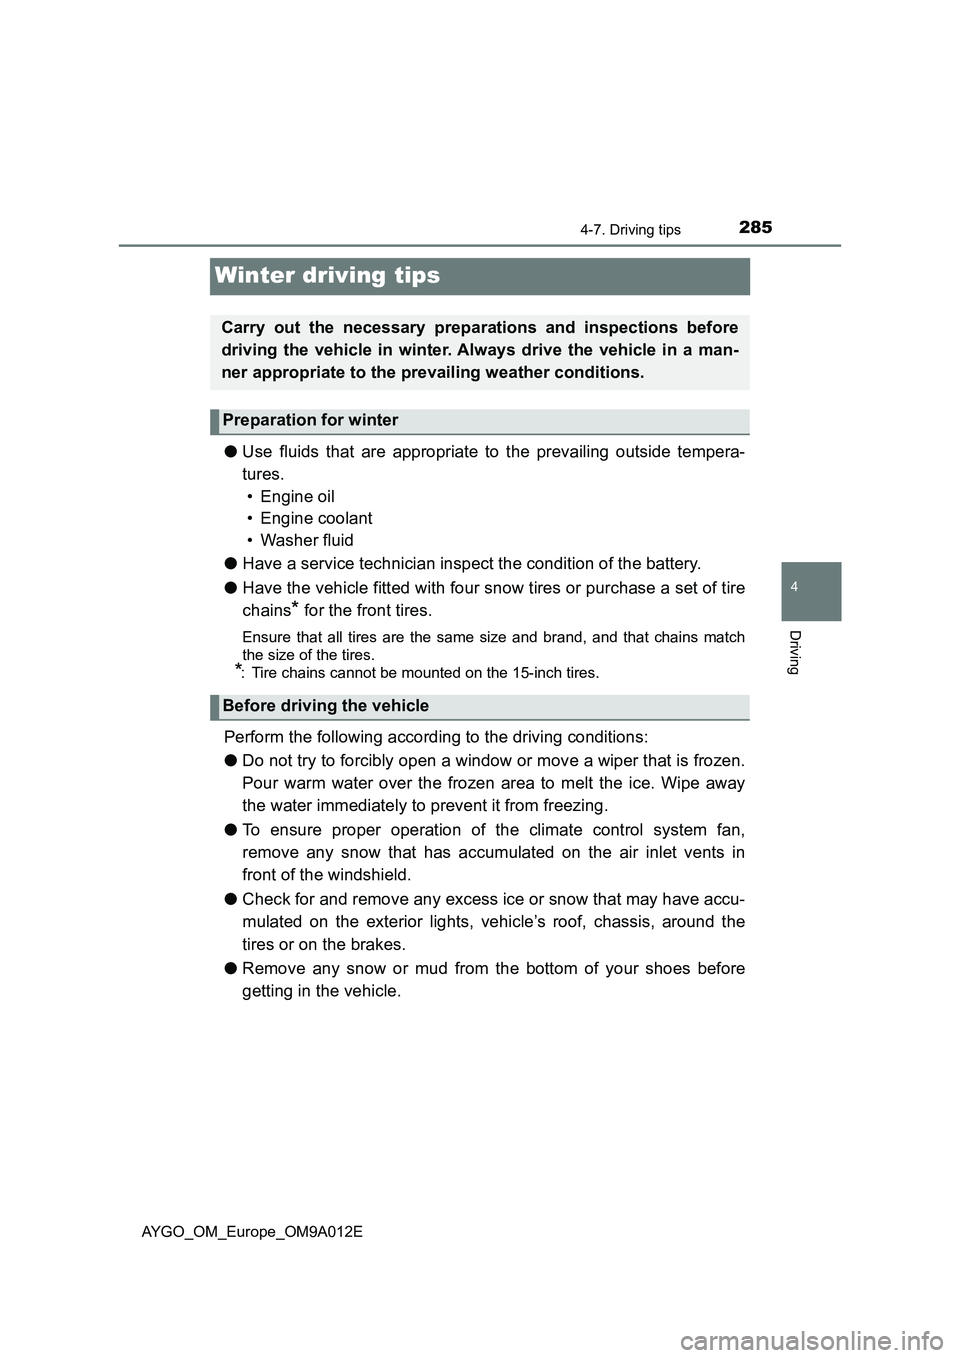 TOYOTA AYGO 2021  Owners Manual 285
4
4-7. Driving tips
Driving
AYGO_OM_Europe_OM9A012E
Winter driving tips
●Use fluids that are appropriate to the prevailing outside tempera-
tures. 
• Engine oil
• Engine coolant
• Washer f